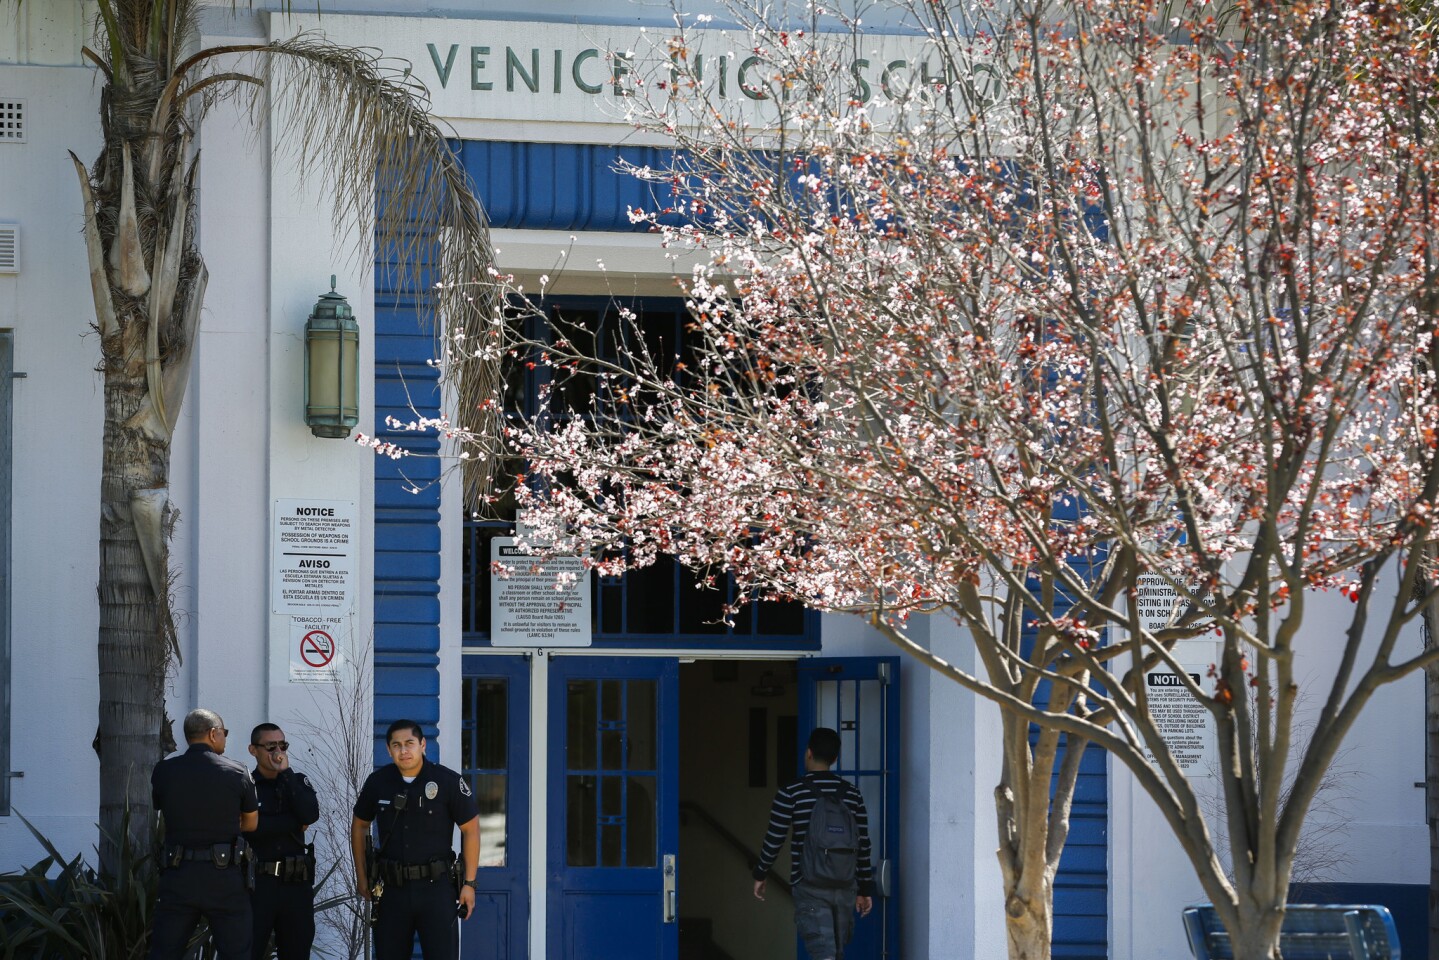 Venice High School, where 14 students were accused of sexual assault.